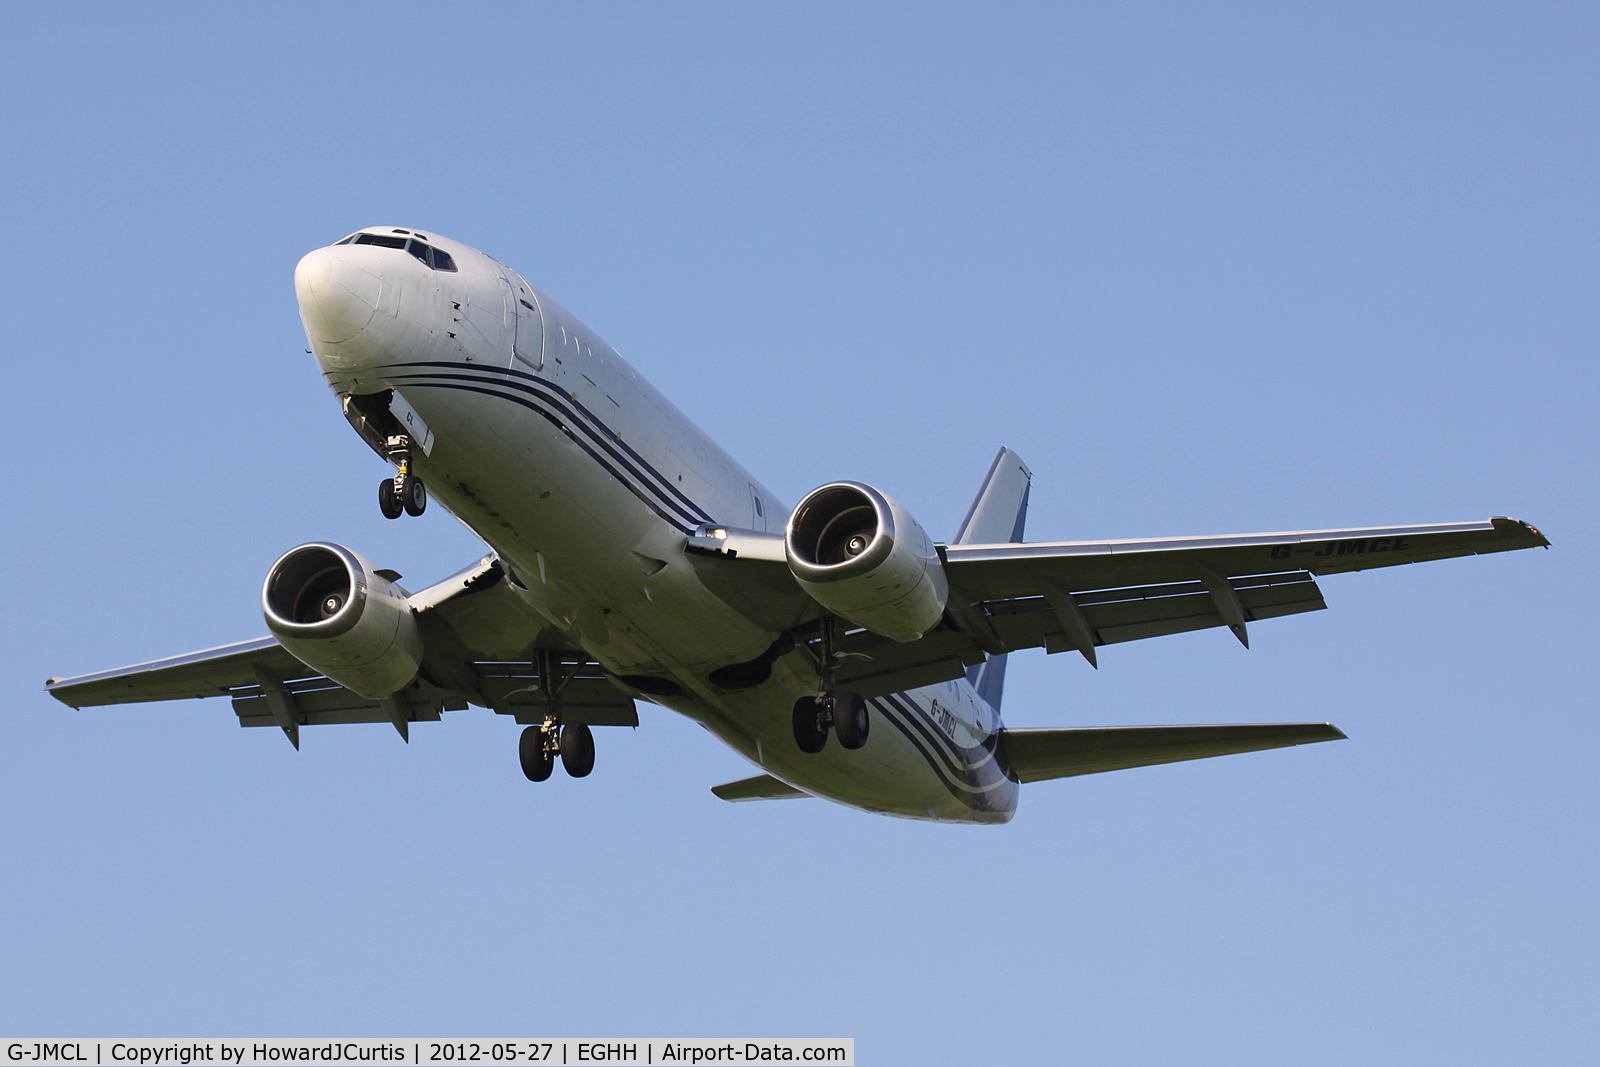 G-JMCL, 1988 Boeing 737-322F C/N 23951, Caught on approach to runway 08.